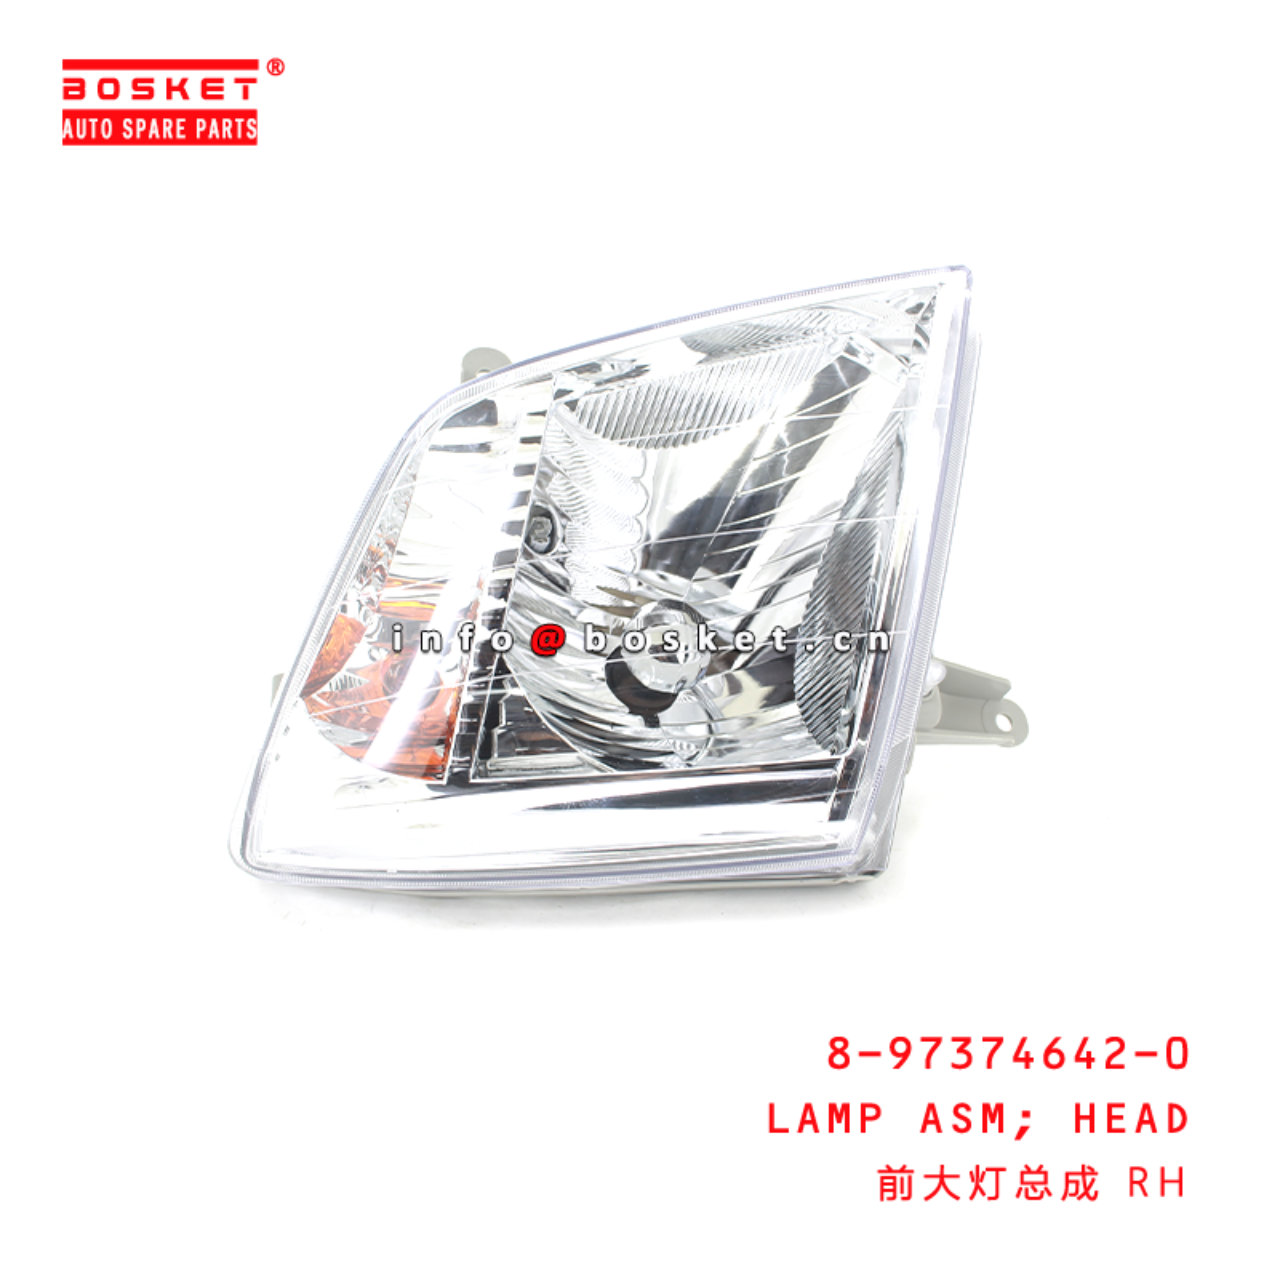 8-97374642-0 Head Lamp Assembly Suitable for ISUZU DMAX 06  8973746420